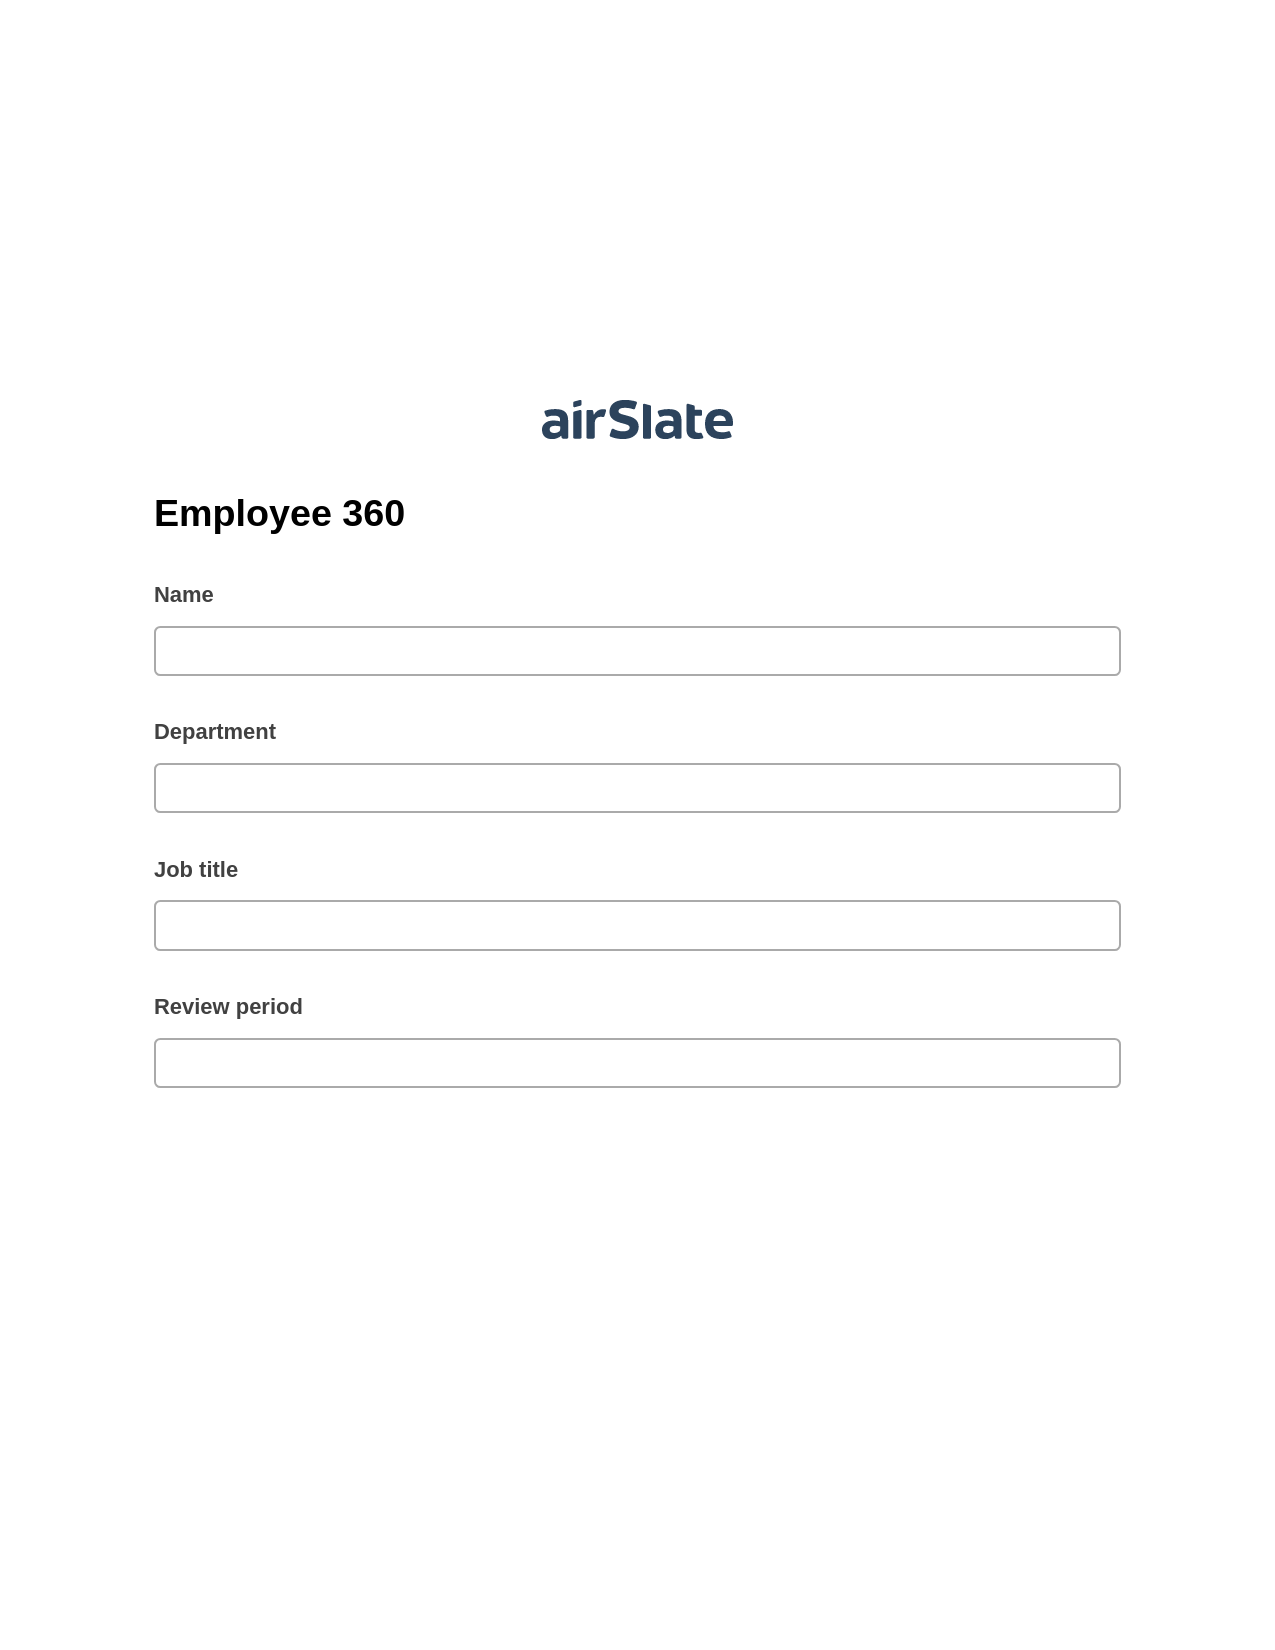 Employee 360 Pre-fill Dropdowns from MySQL Bot, Update MS Dynamics 365 Record Bot, Export to NetSuite Bot